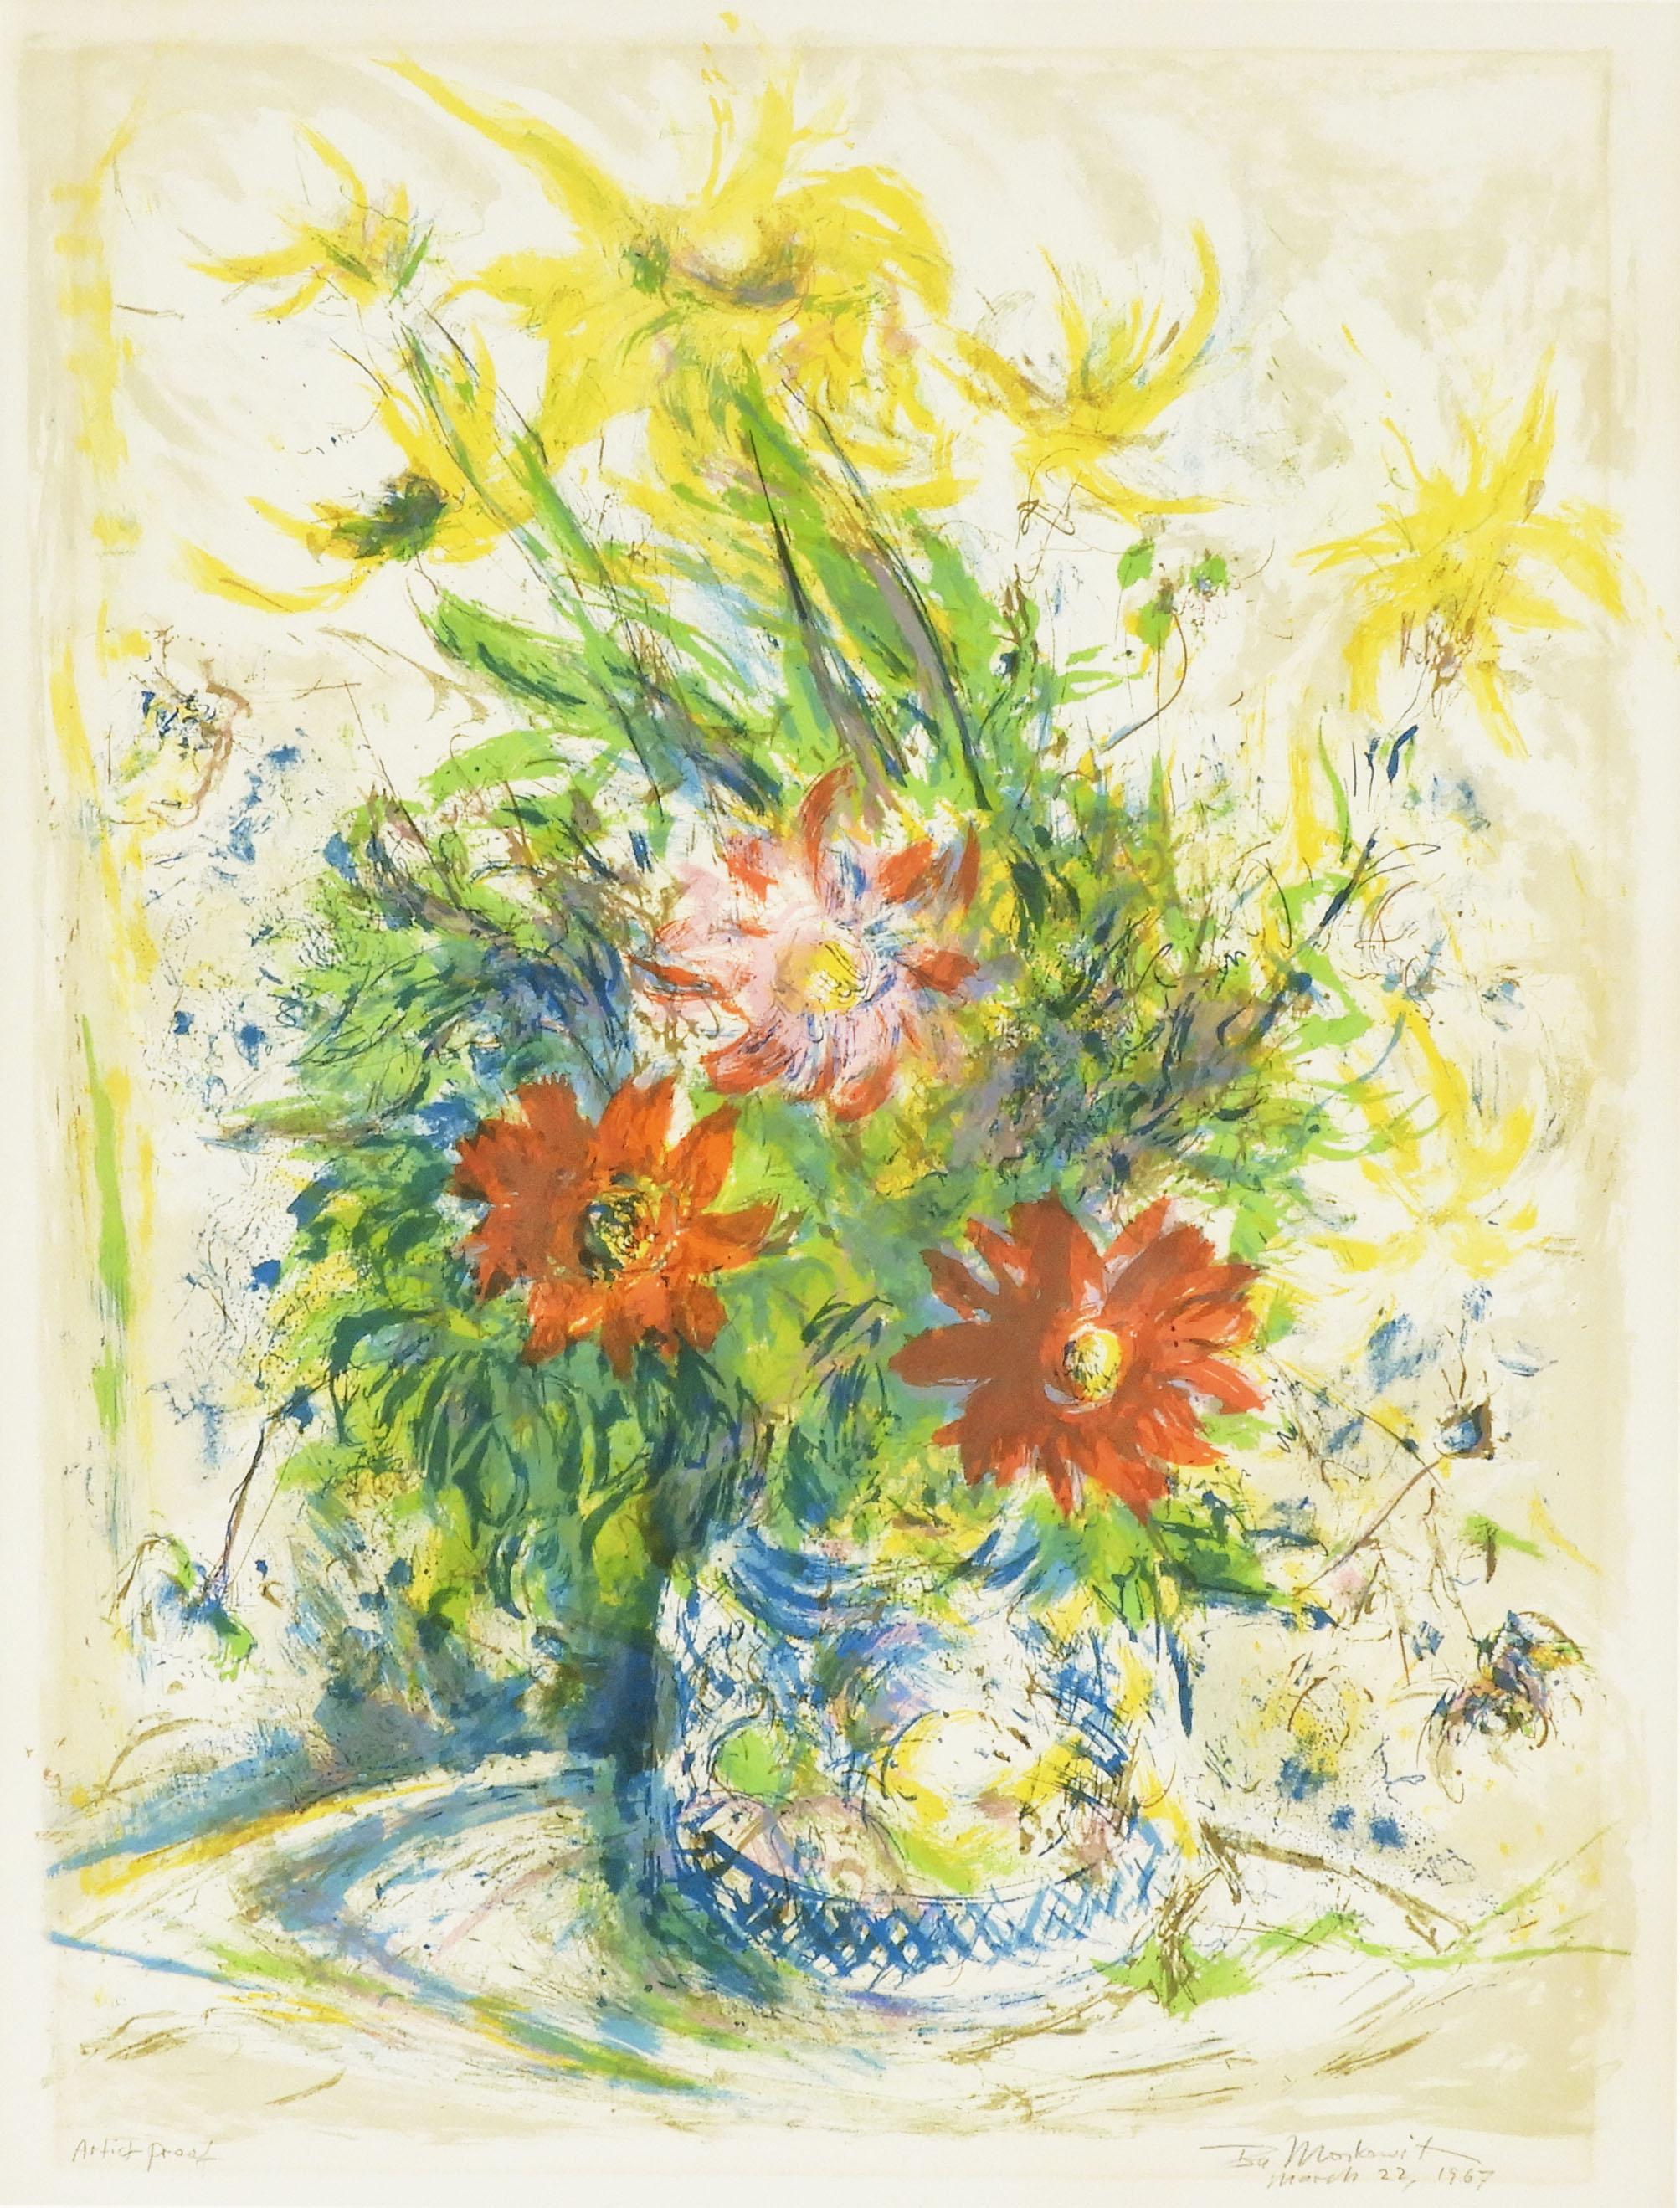 ‘Floral Still Life’ by Ira Moskowitz (1912-2001)

Large, Hand-signed Artist Proof.

A good quality, mid-century lithograph in excellent condition, beautifully presented and professionally framed, ready to hang.

